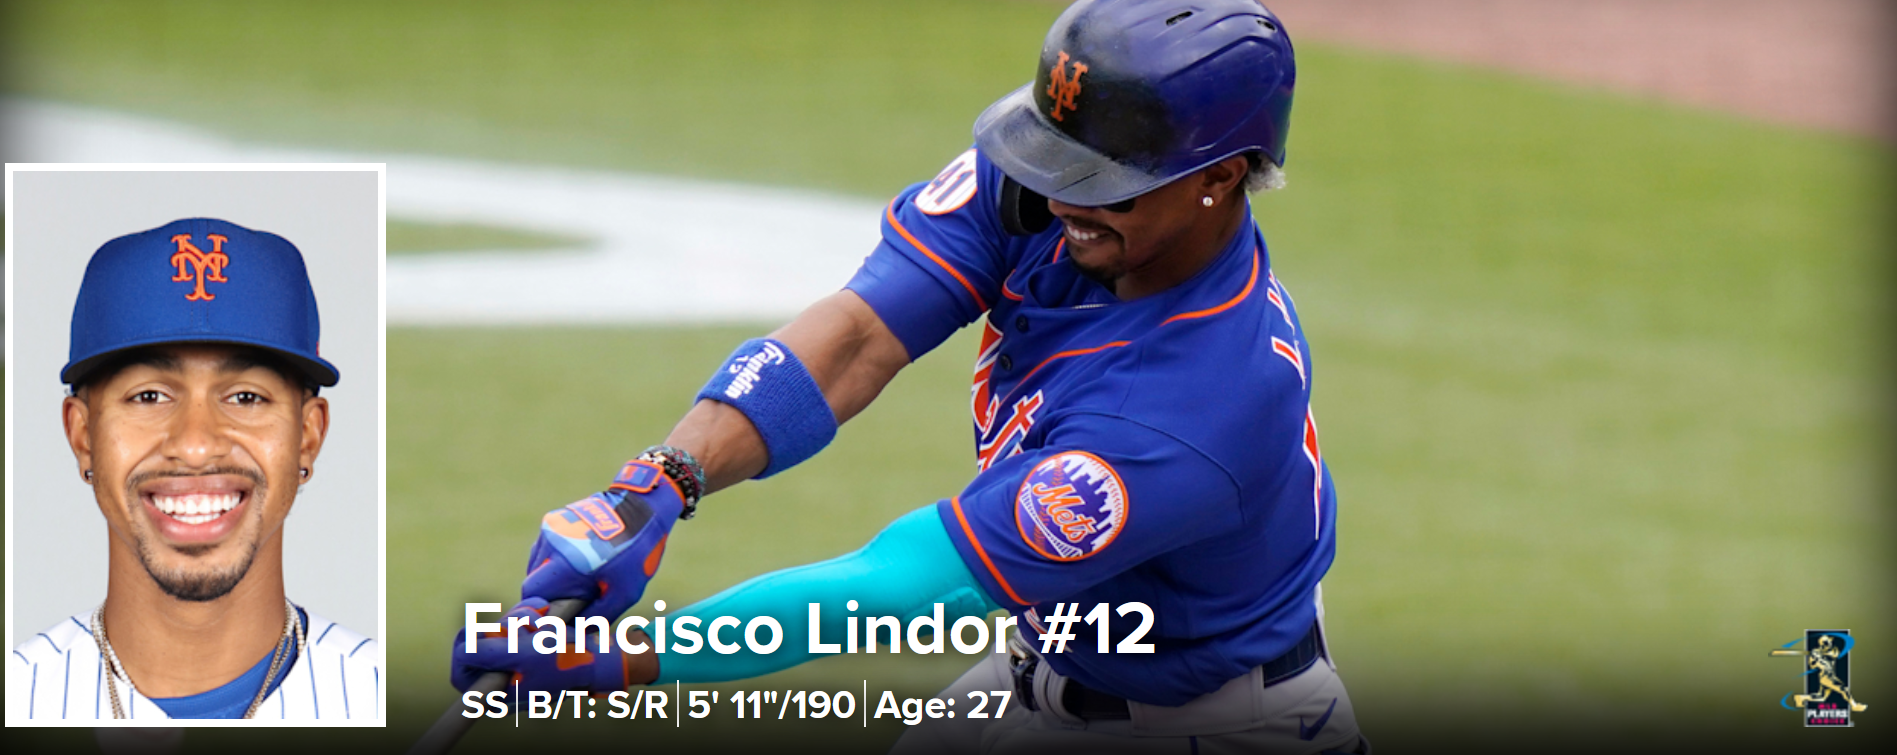 Mets Combined No-Hitter - Francisco Lindor #12 - Game Used Black